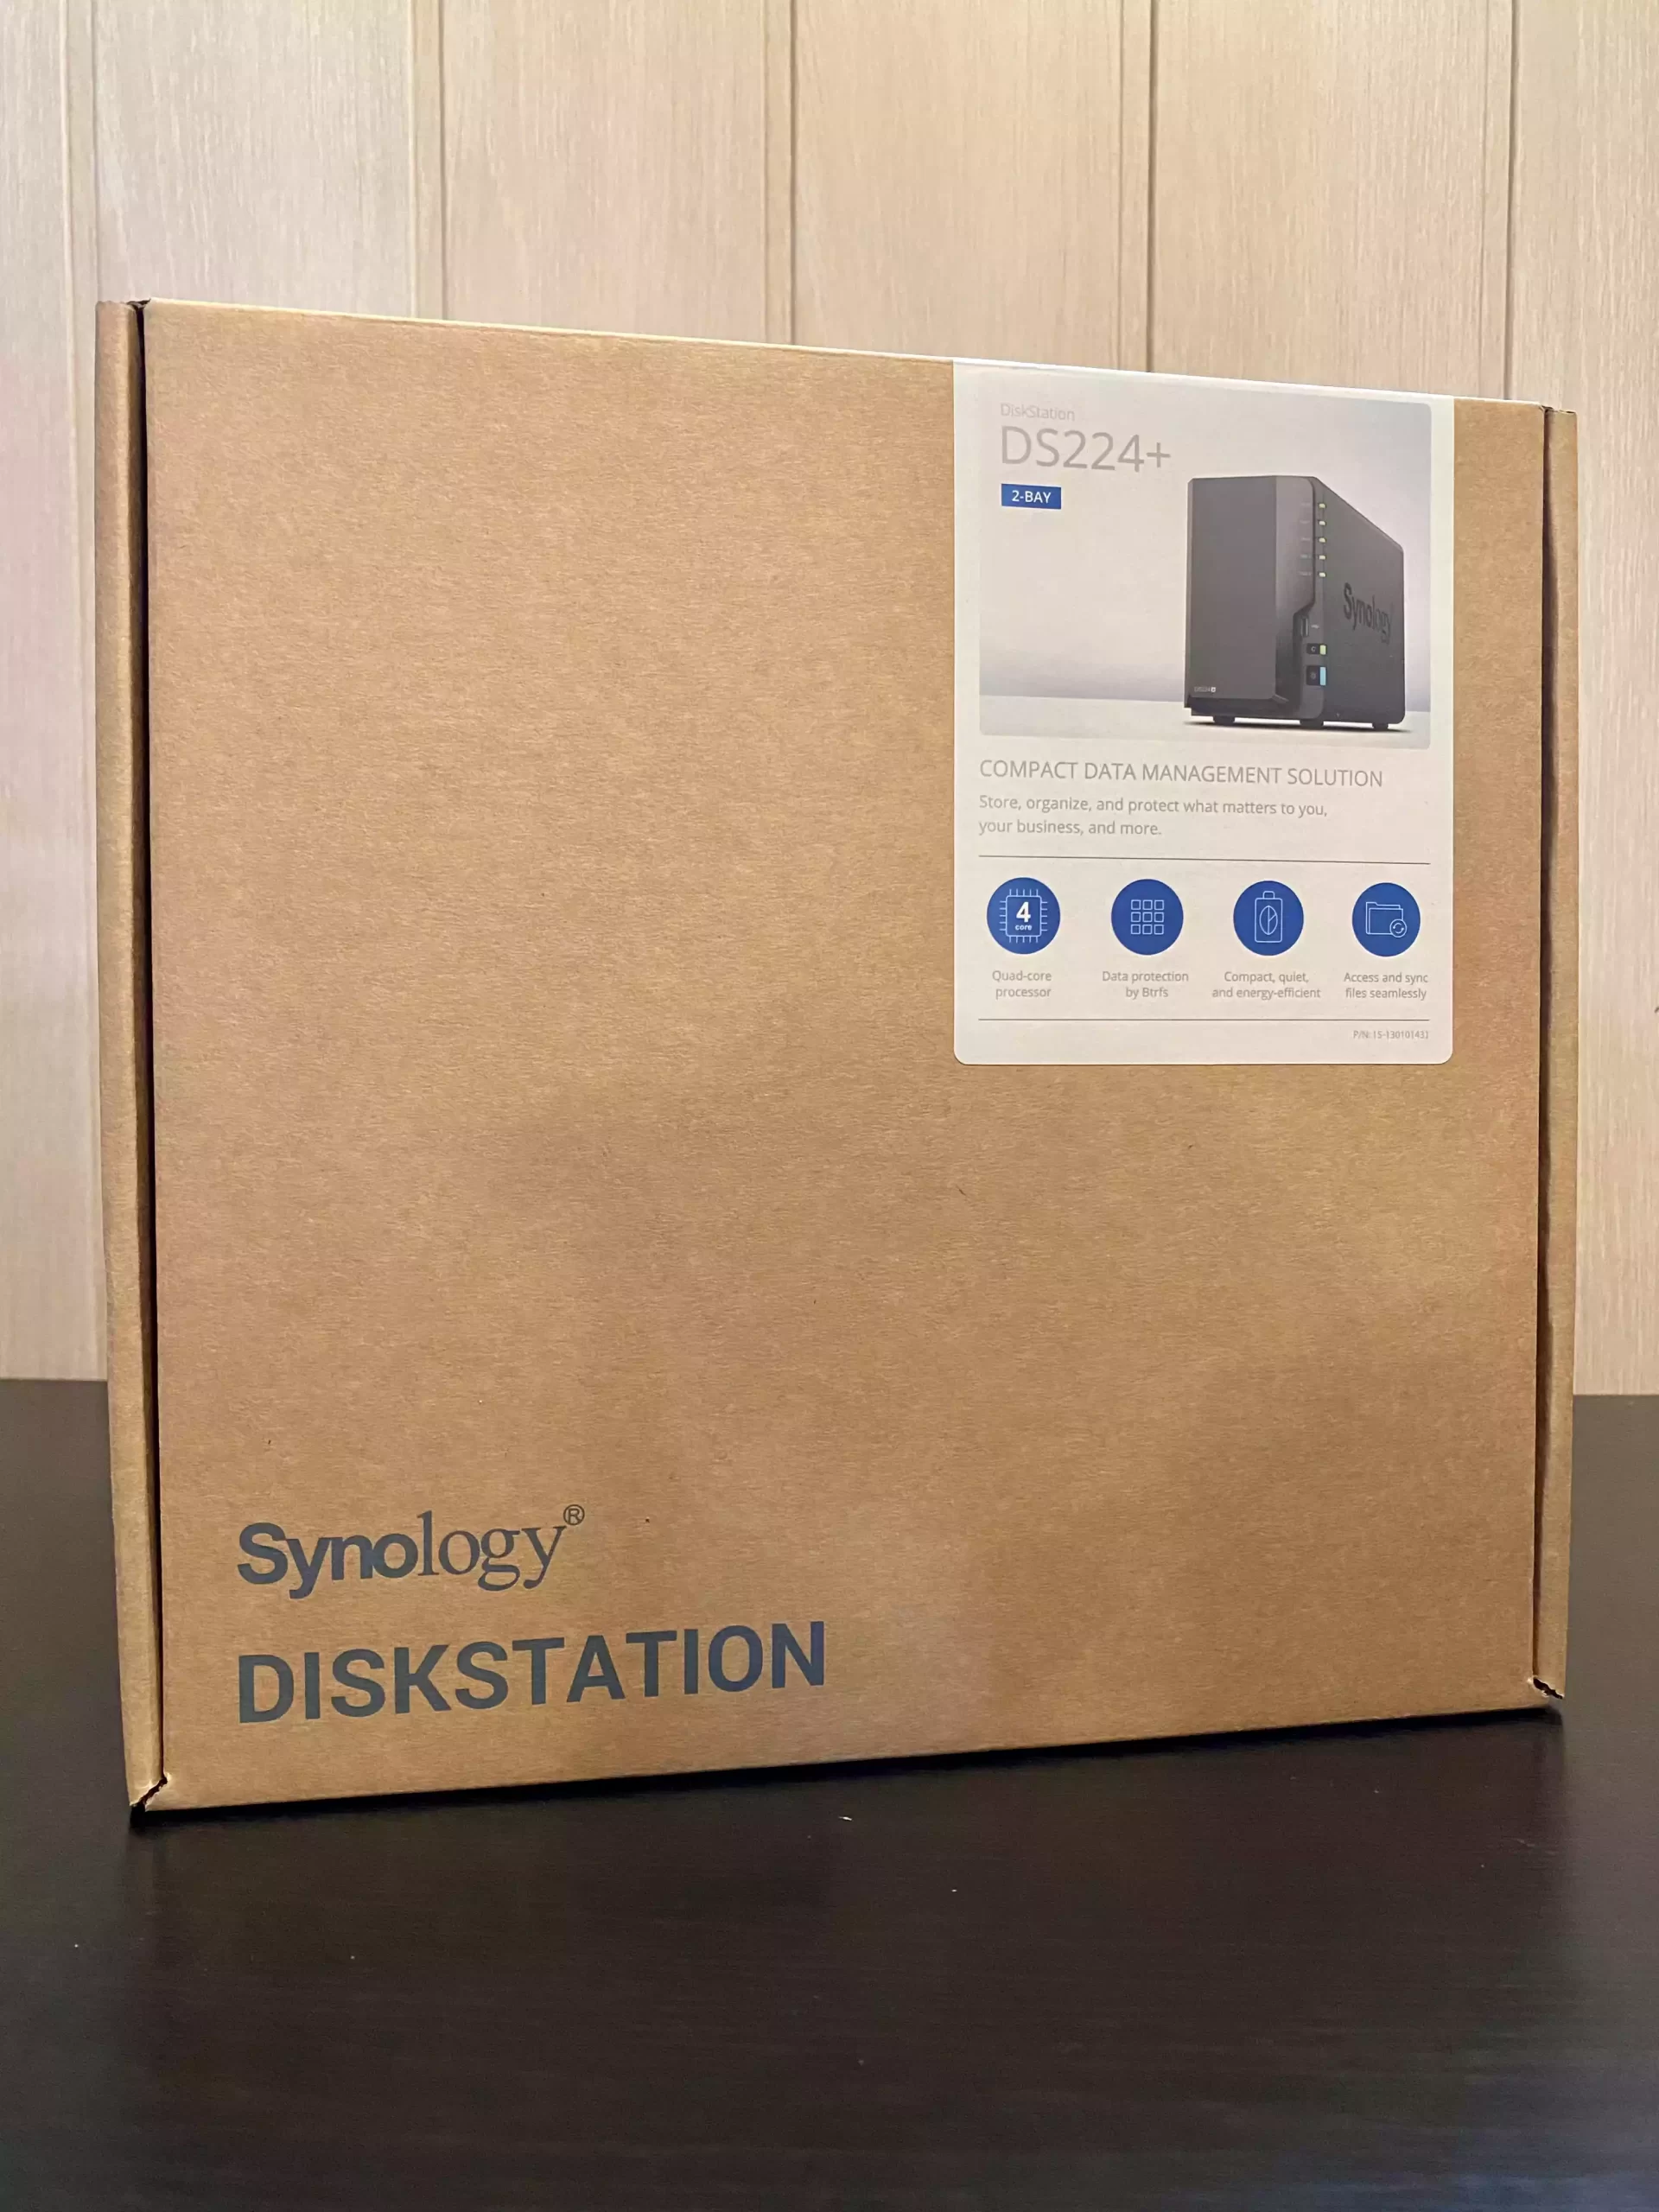 Synology DS224+ NAS – Should You Buy (Short Review) – NAS Compares